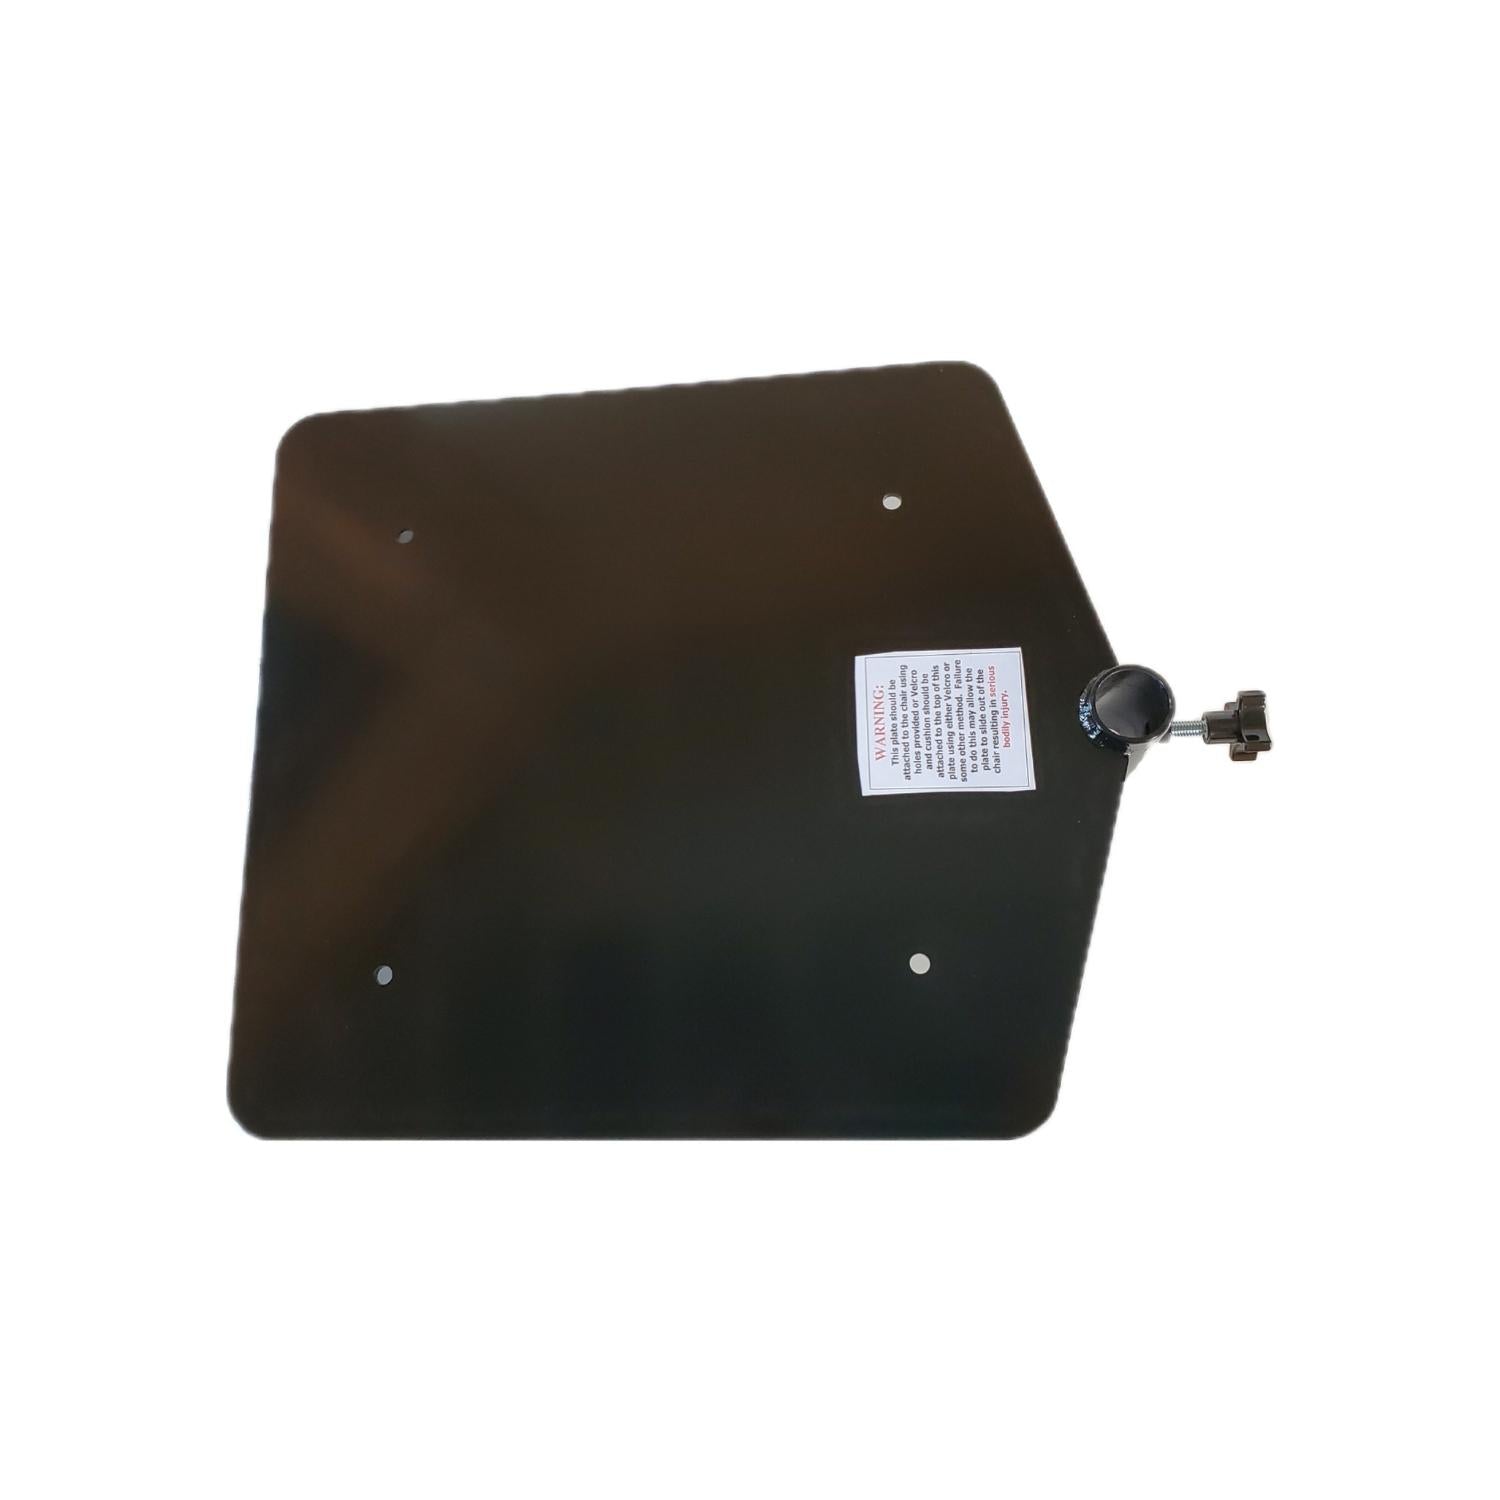 Seat Pan for Powershooter, Sharpshooter, Crossbow and Fishing Rod